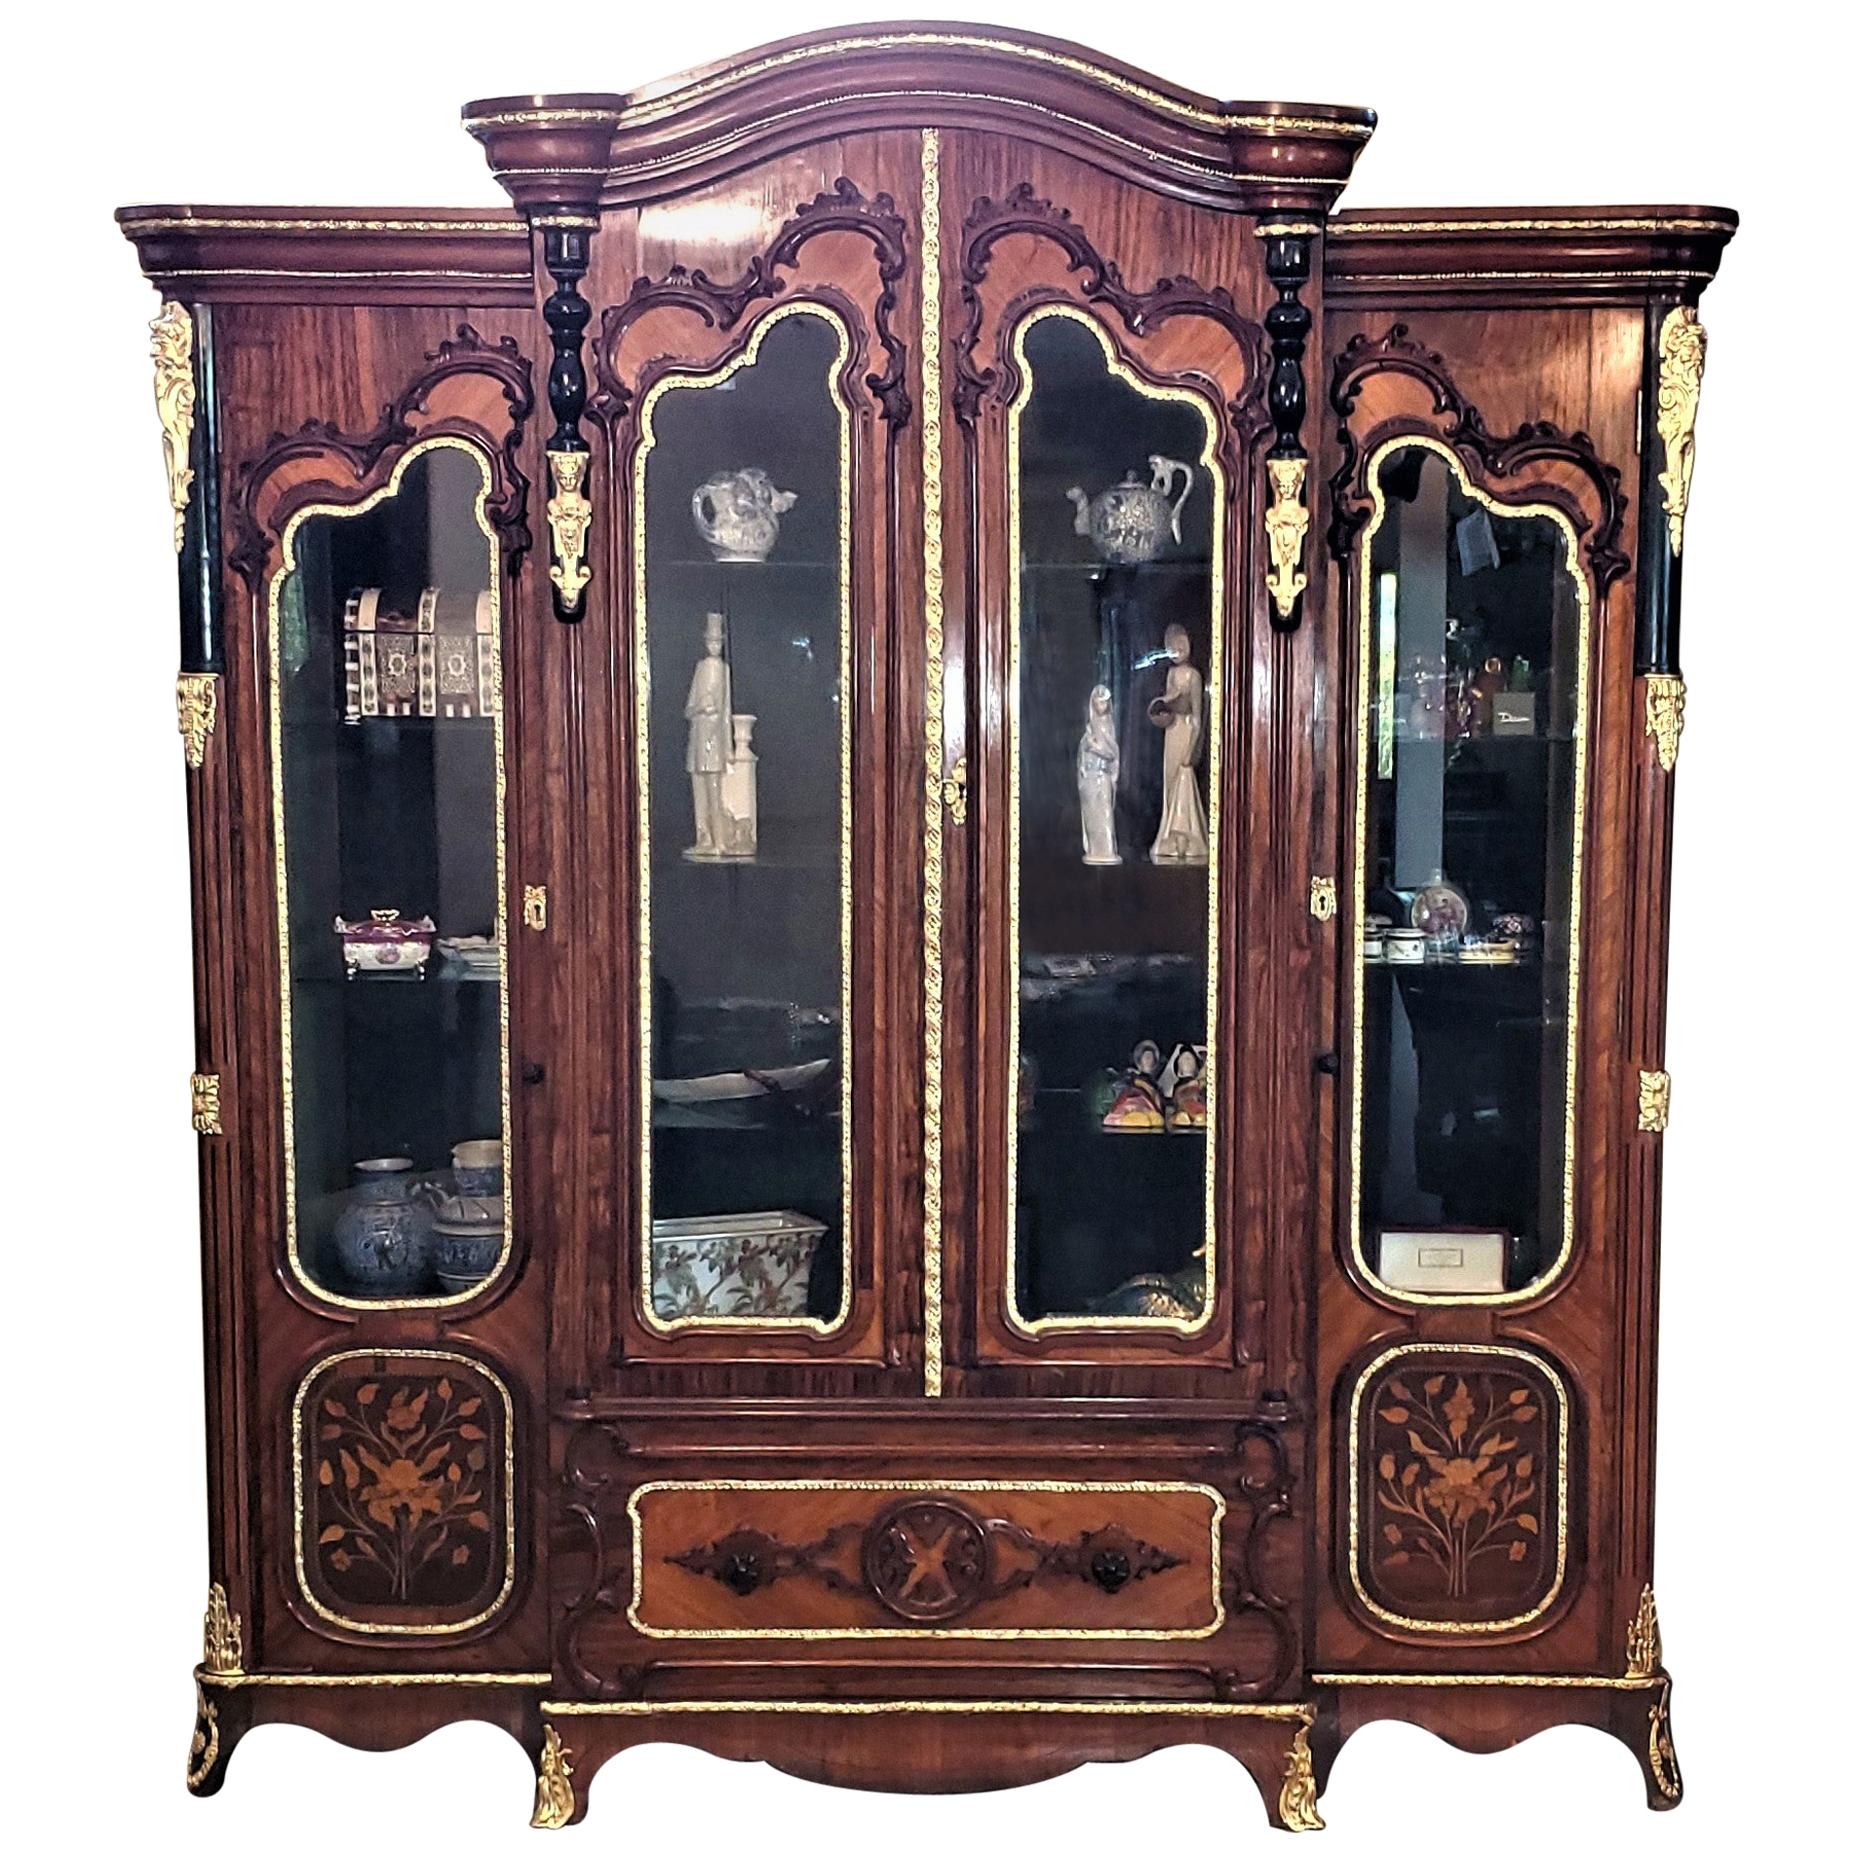 Large 19 Century French Rococo or Neoclassical Revival Style Vitrine